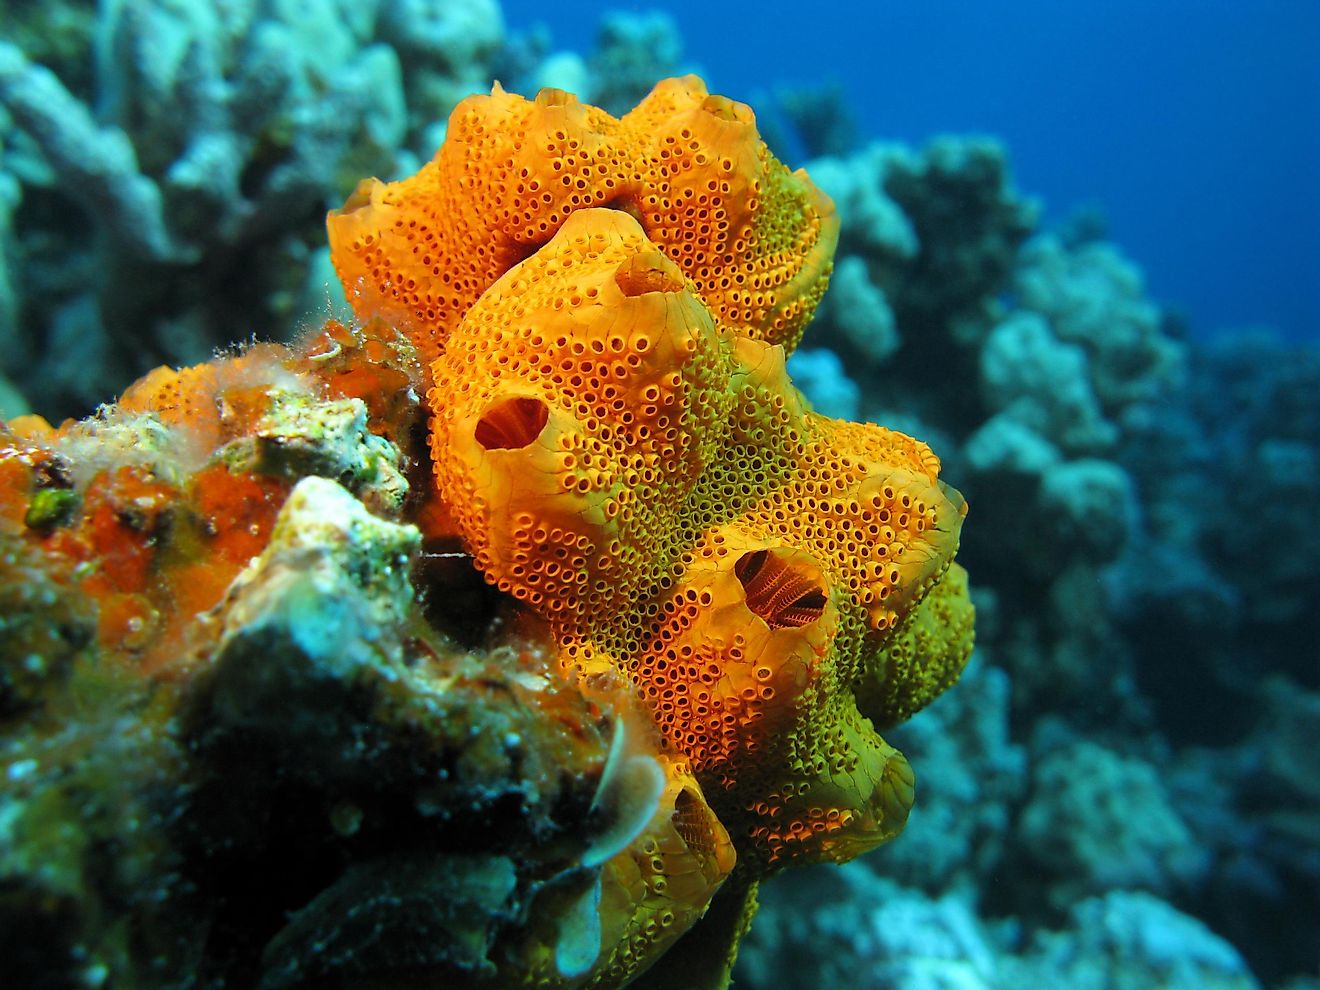 Sponges living in the sea are indeed animals.